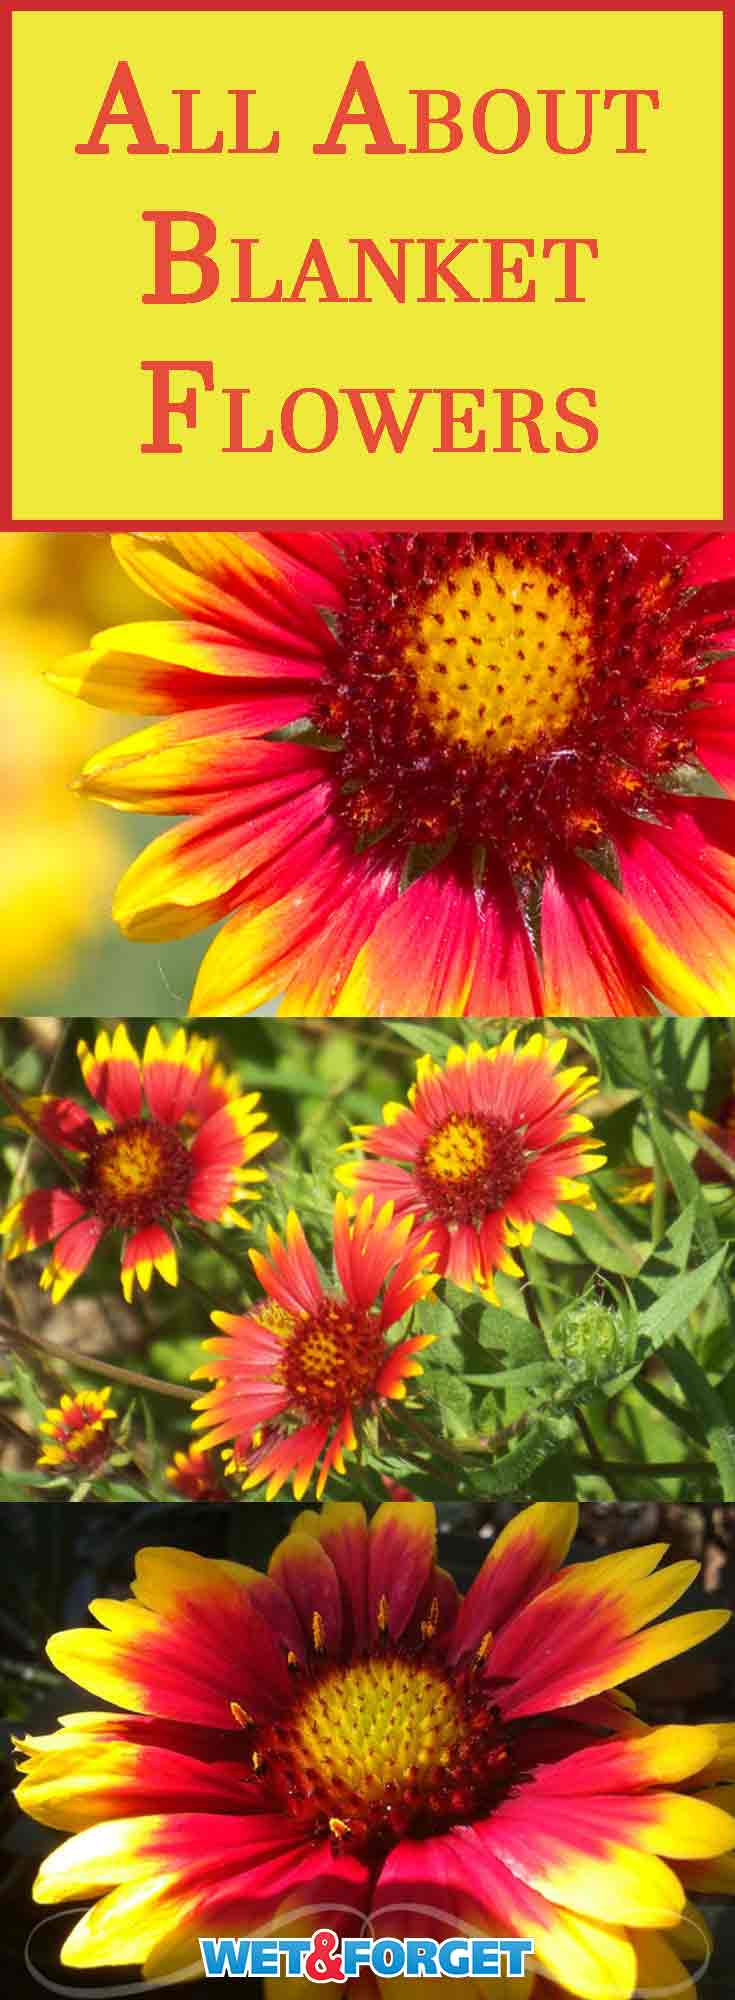 Meet the blanket flower! This colorful beauty is hardy almost anywhere in the U.S. and is extremely low maintenance. This no-fuss perennial even blooms the first year out, so you can start enjoying it right away. Read on to learn more about this carefree firecracker!